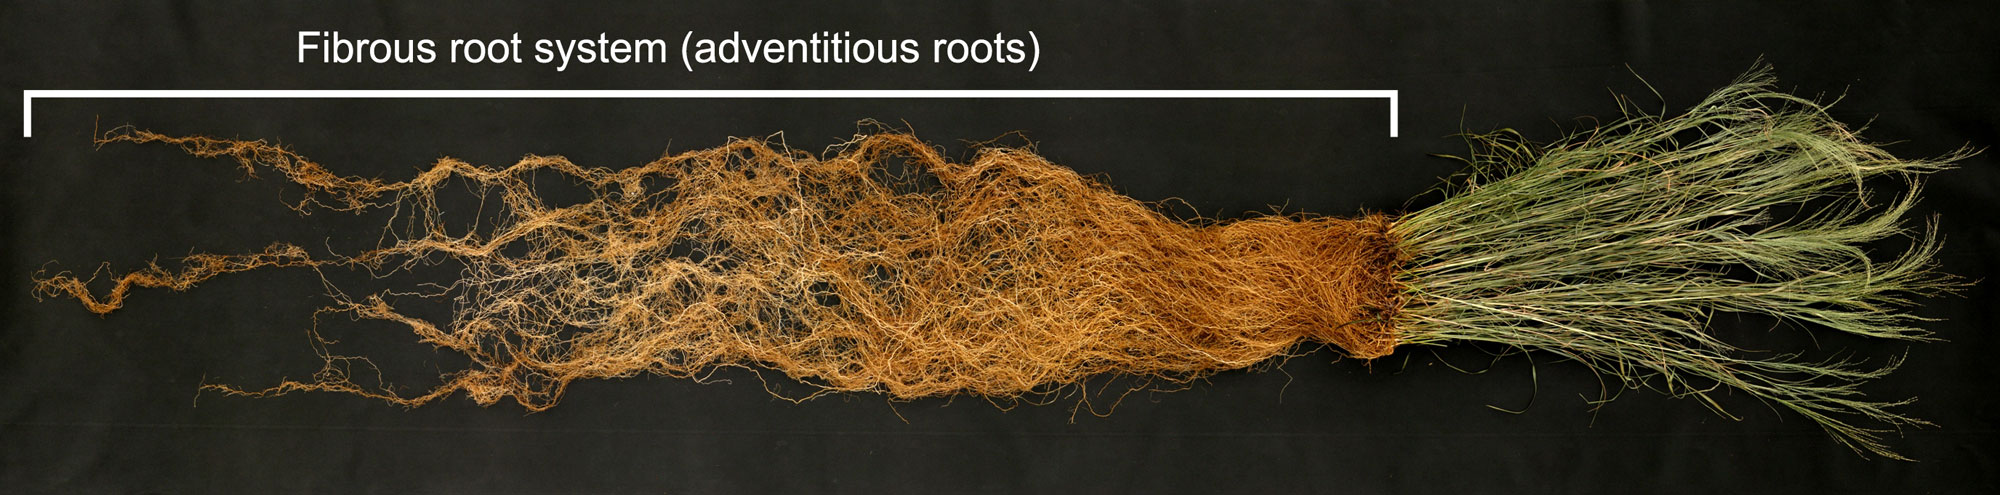 Photograph of a switchgrass showing the fibrous root system. The plant is arranged horizontally with roots to the left and above-ground parts to the right. A white bracket is used to indicate the root system. The roots are brown in color and similar in size, almost looking like a mass of hair.